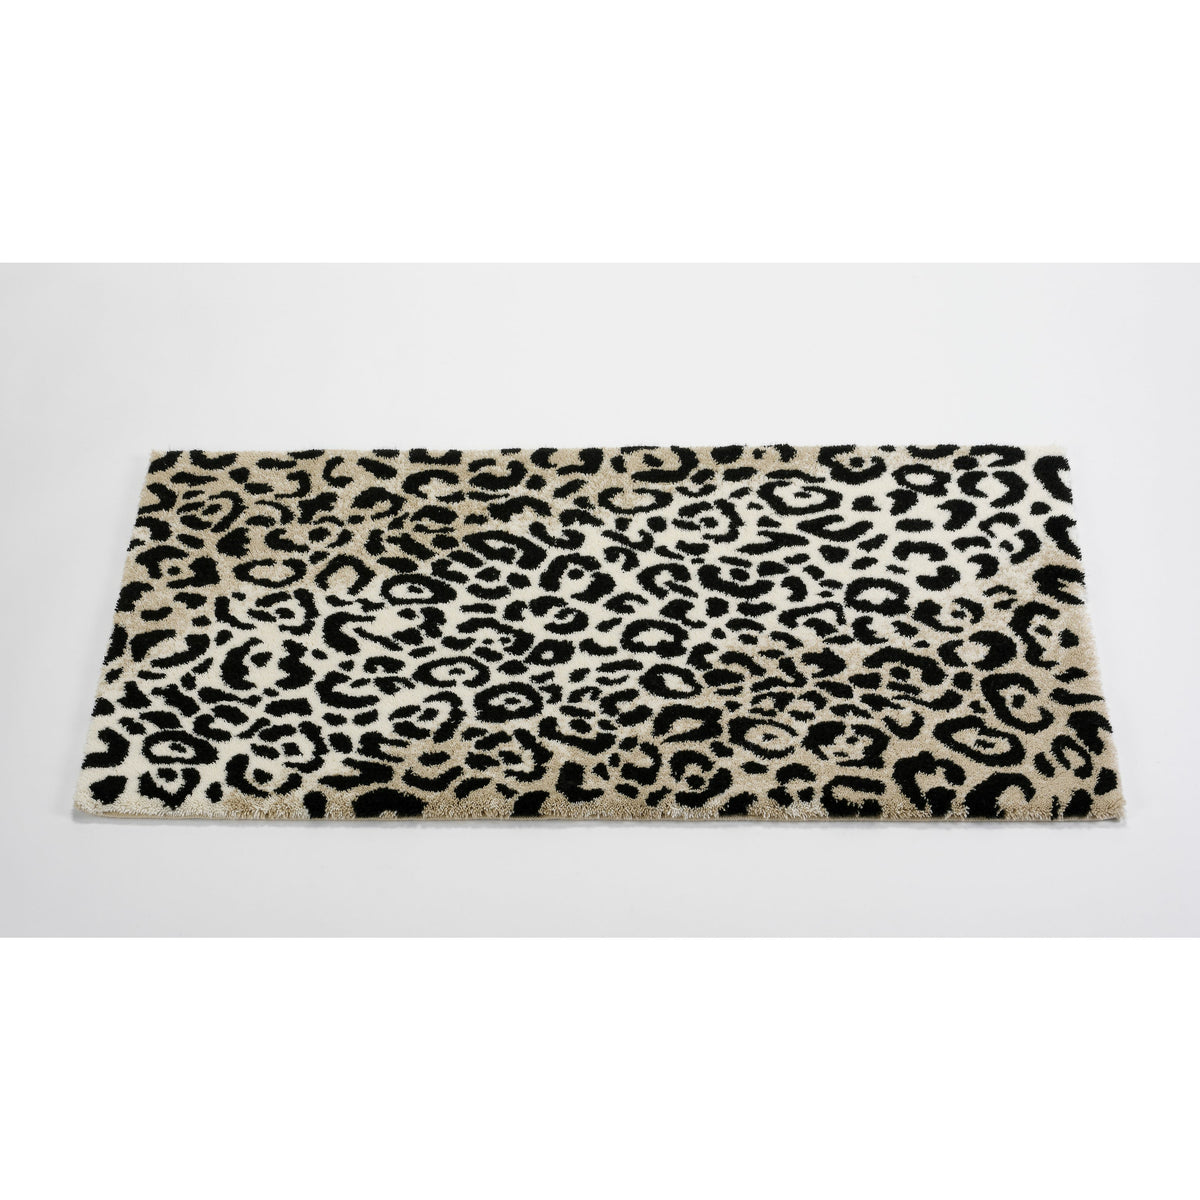 Abyss Habidecor Leopard Bath and Area Rugs Flat Fine Linens